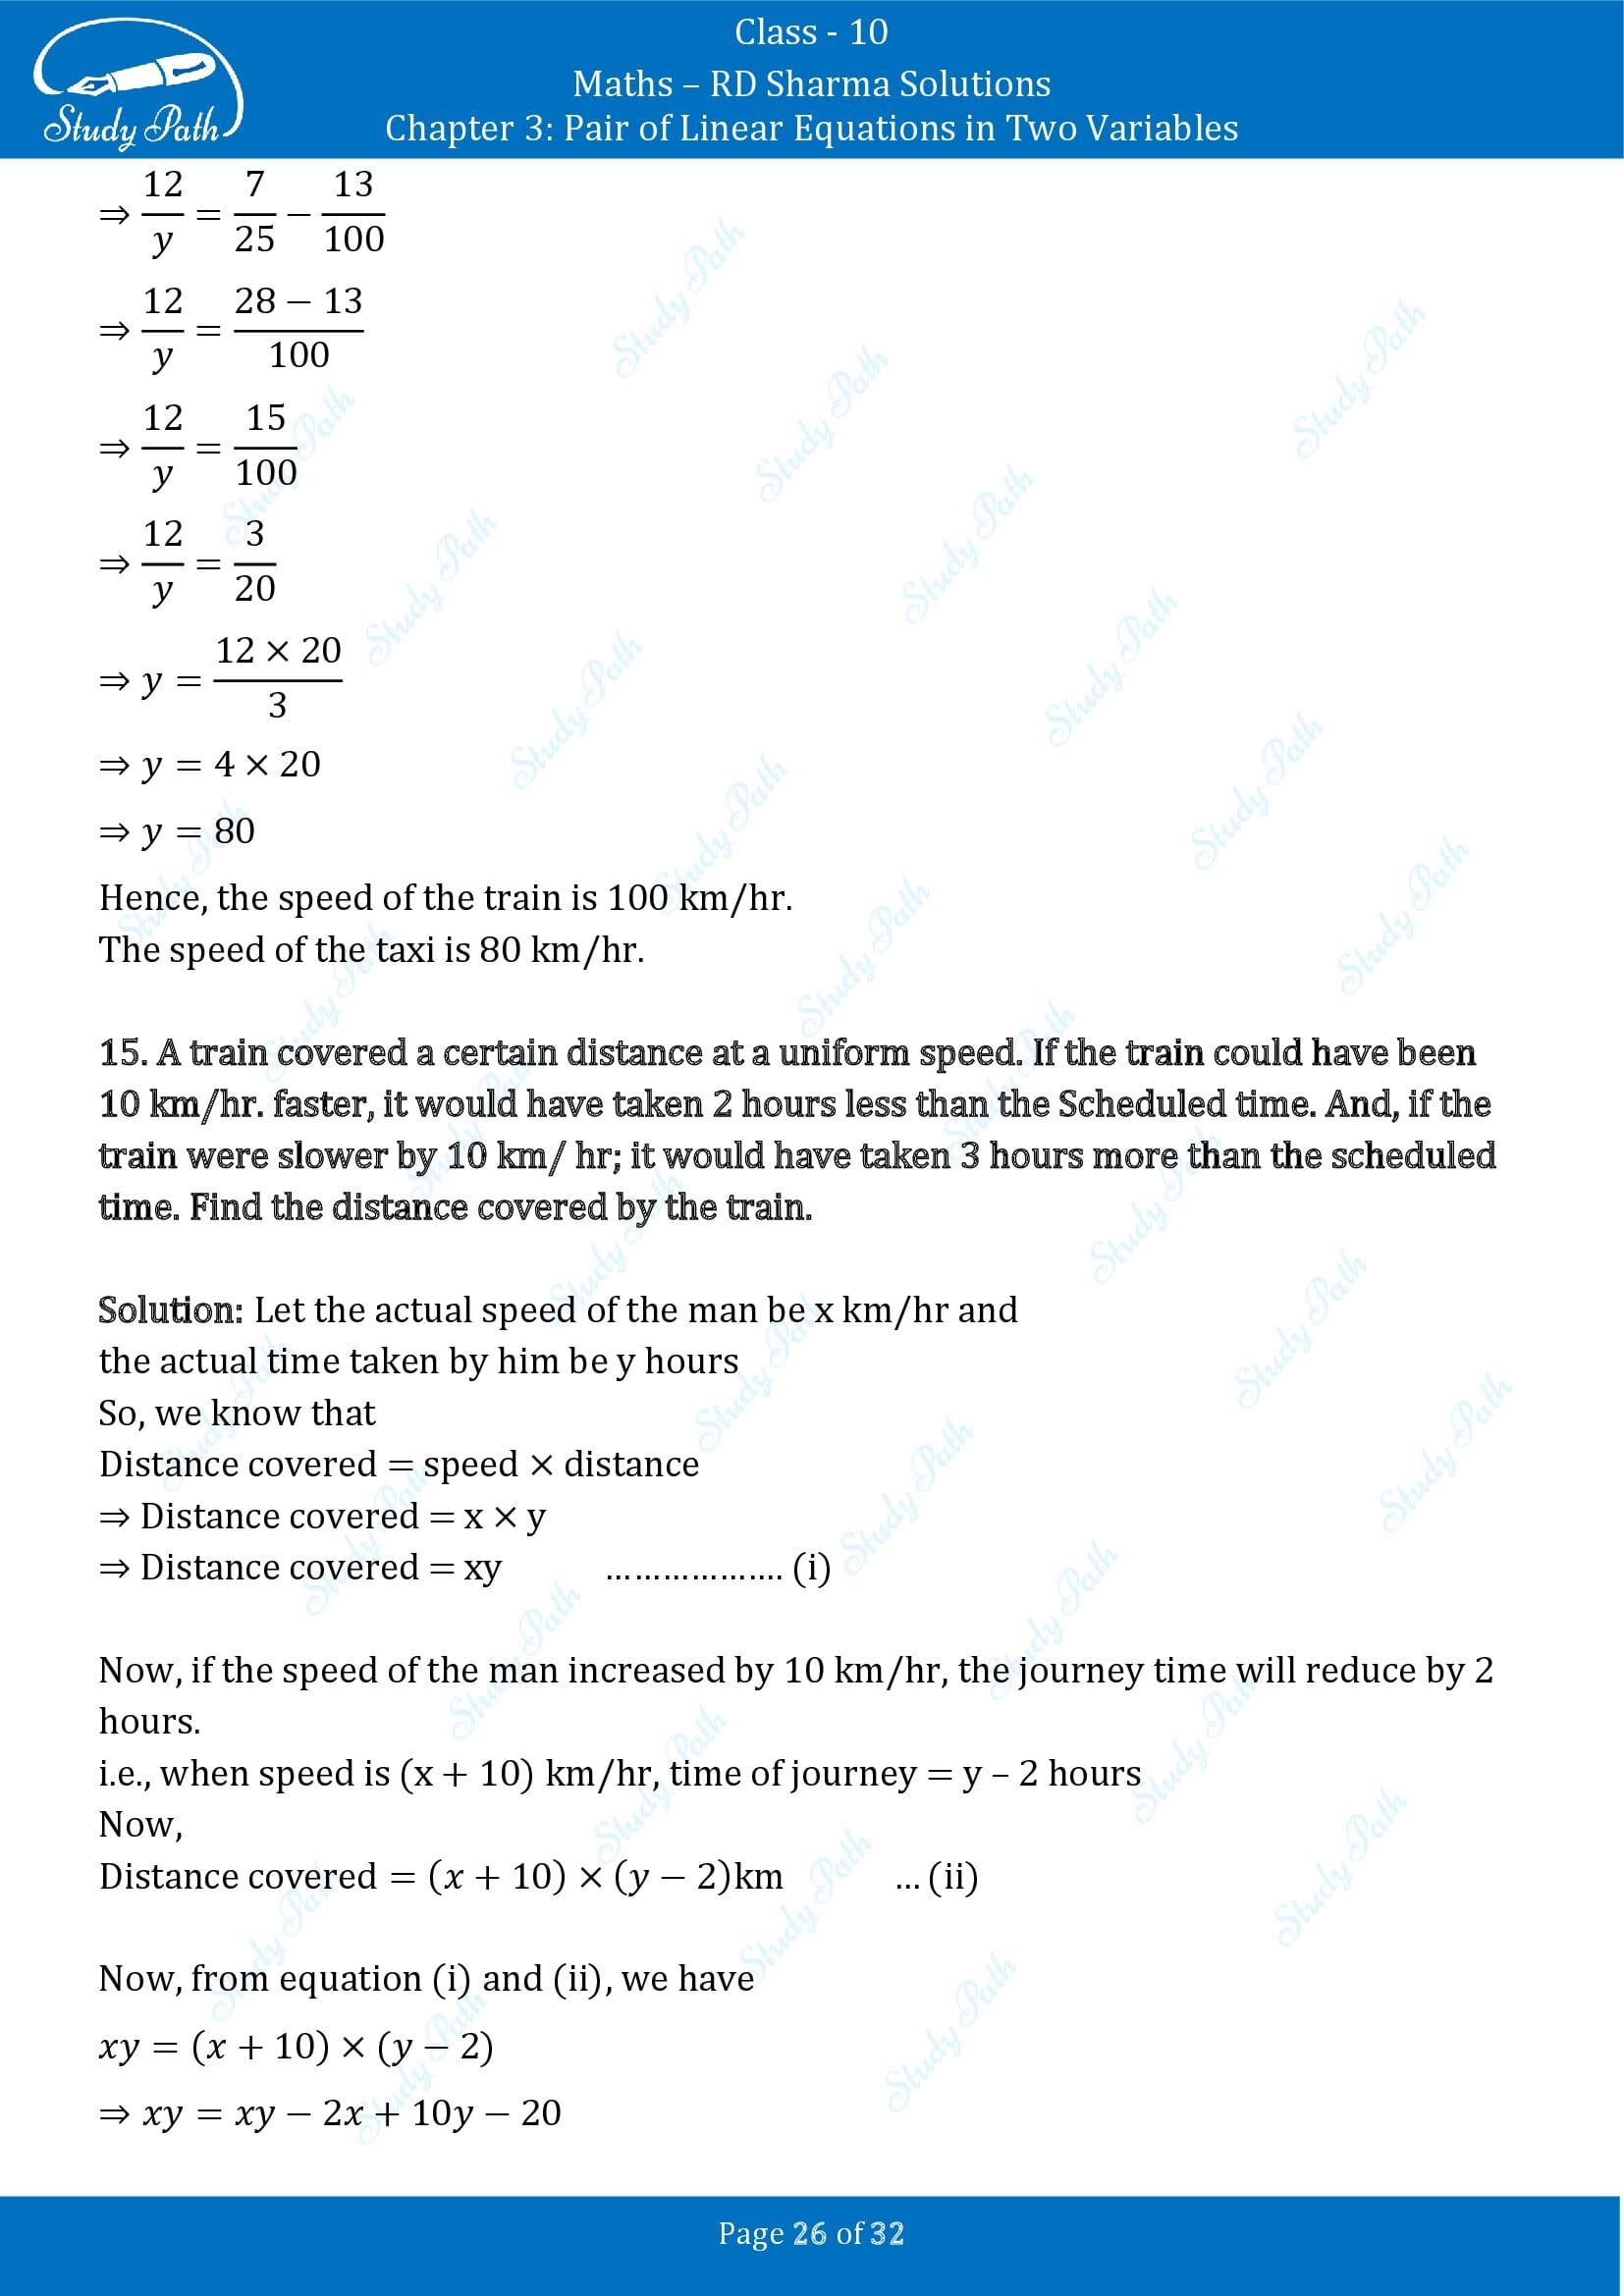 RD Sharma Solutions Class 10 Chapter 3 Pair of Linear Equations in Two Variables Exercise 3.10 00026